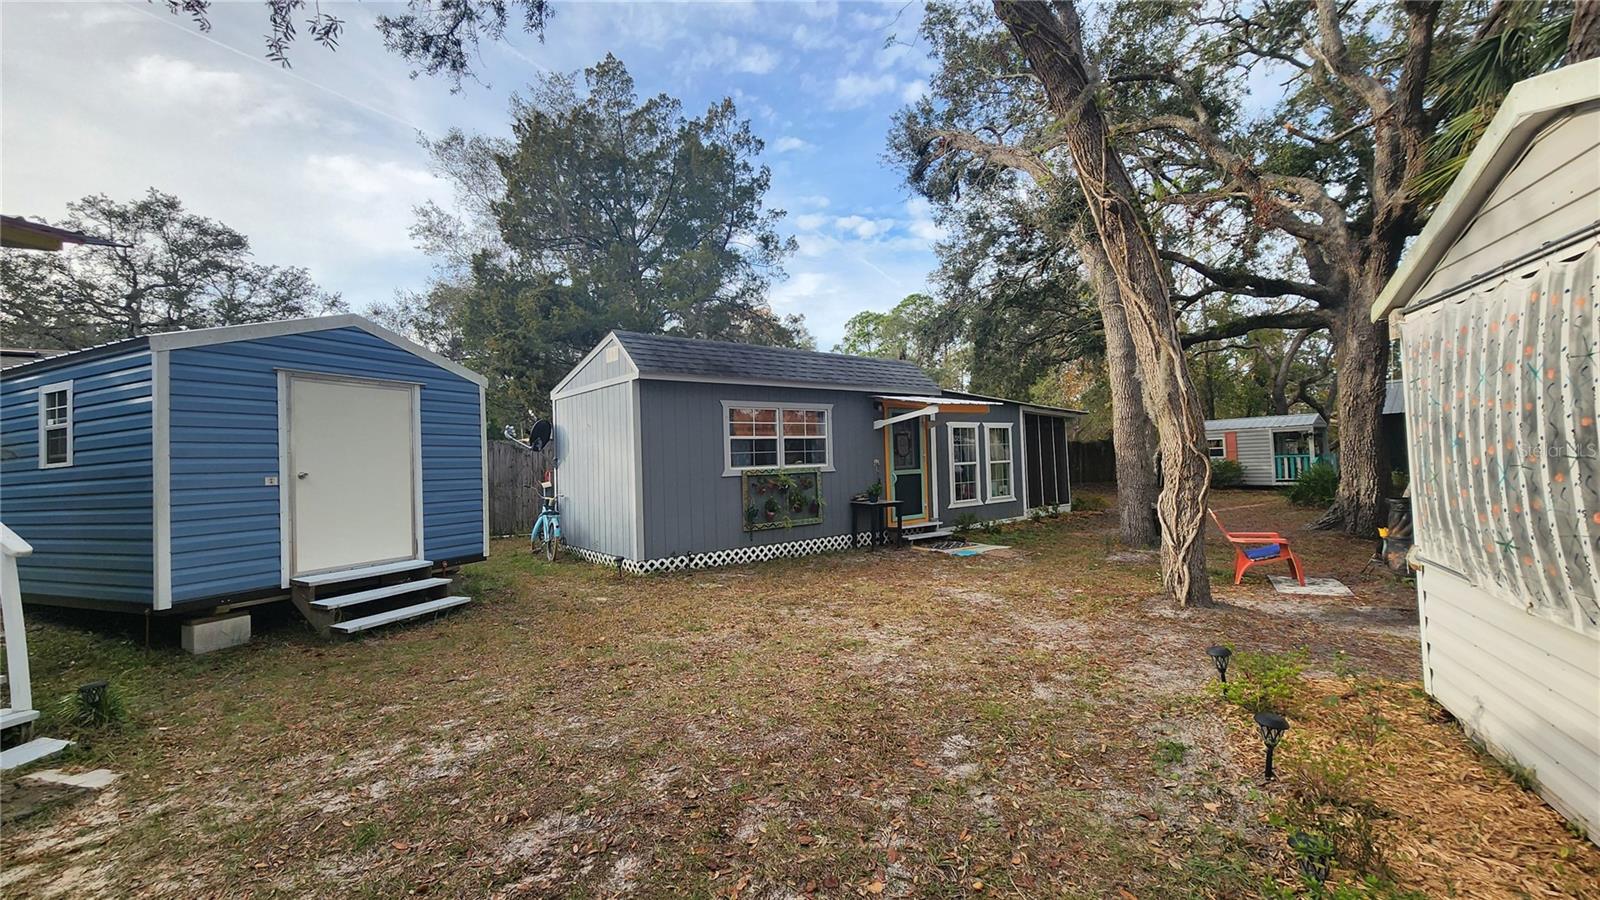 Tiny Homes for Sale in Live Oak, FL